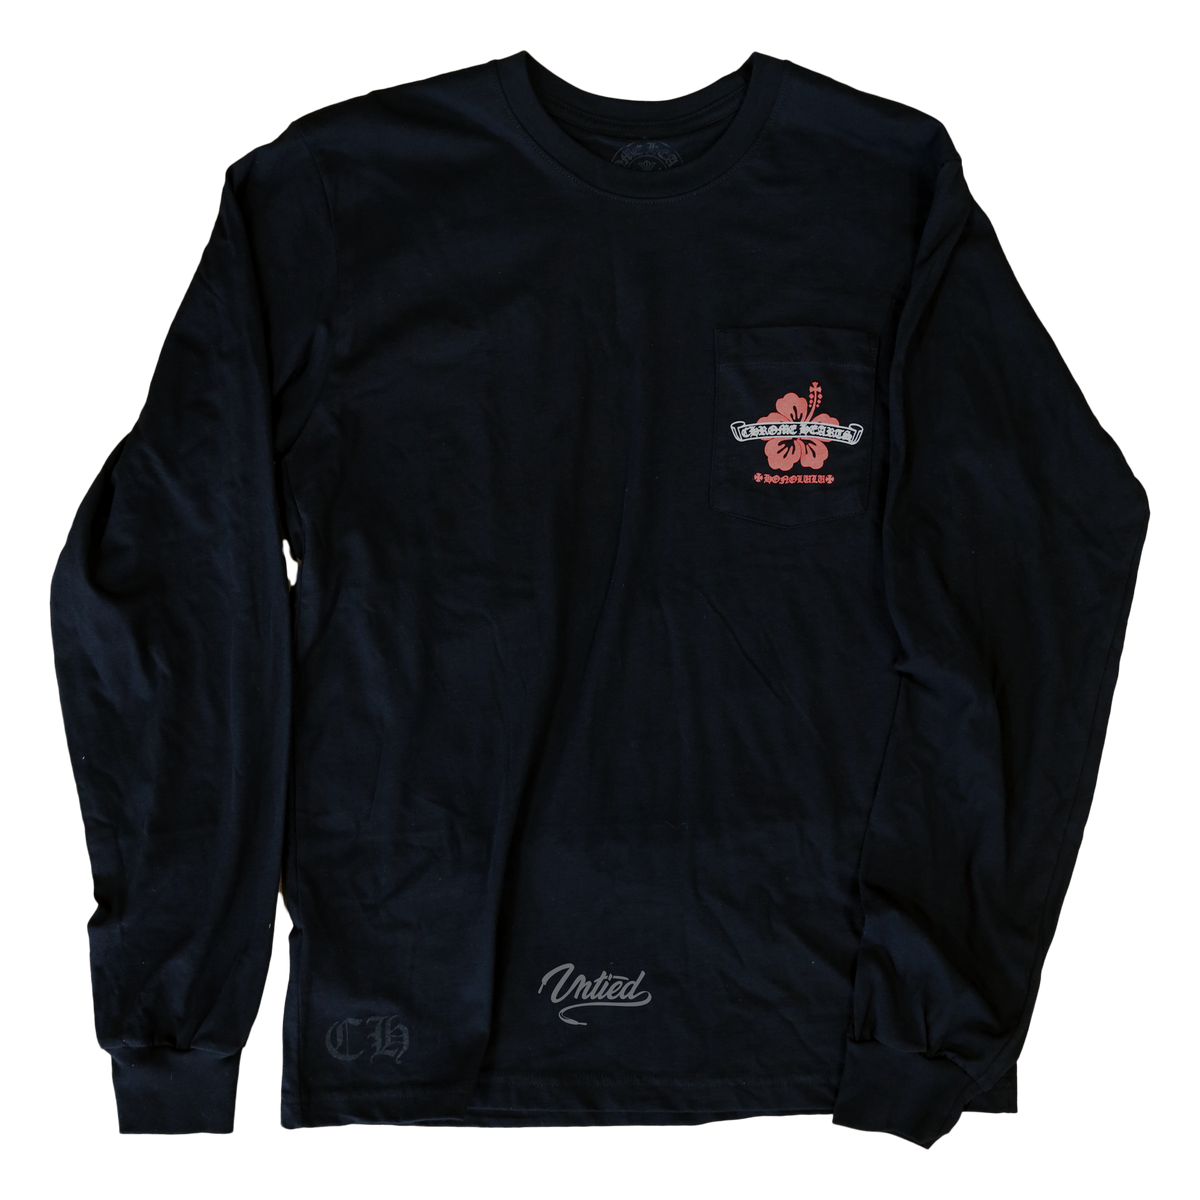 Chrome Hearts Honolulu Floral Pocket Crew L/S Tee "Black/Red"